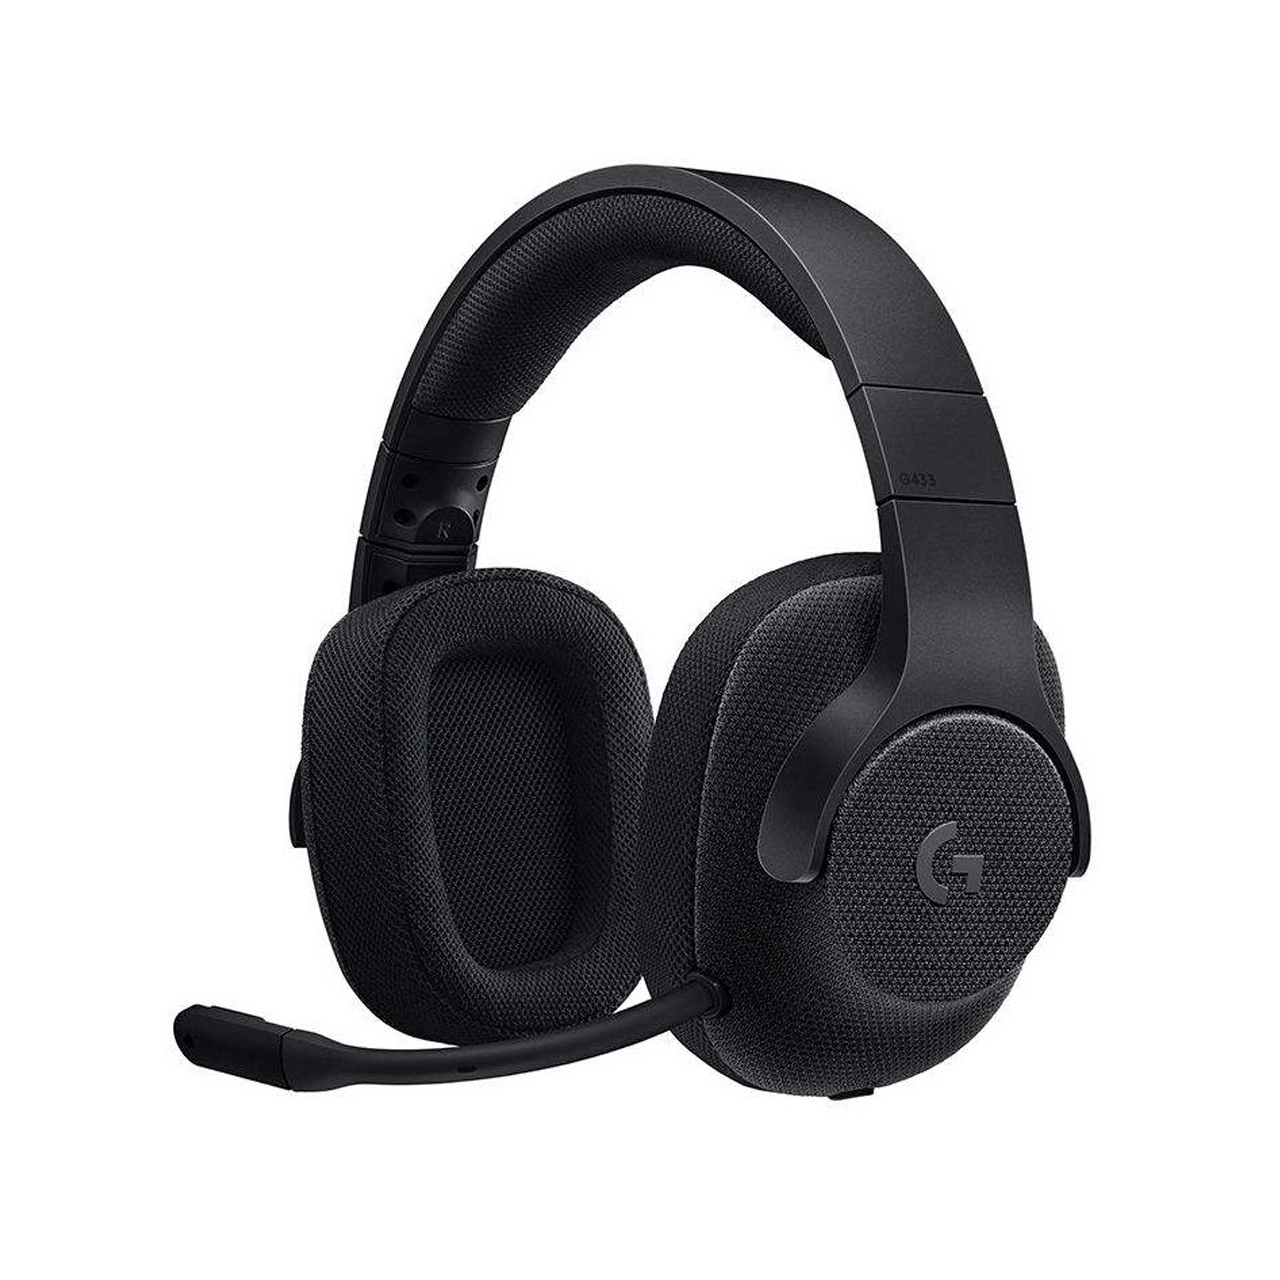 Logitech-G433-Wired-Gaming-Headset